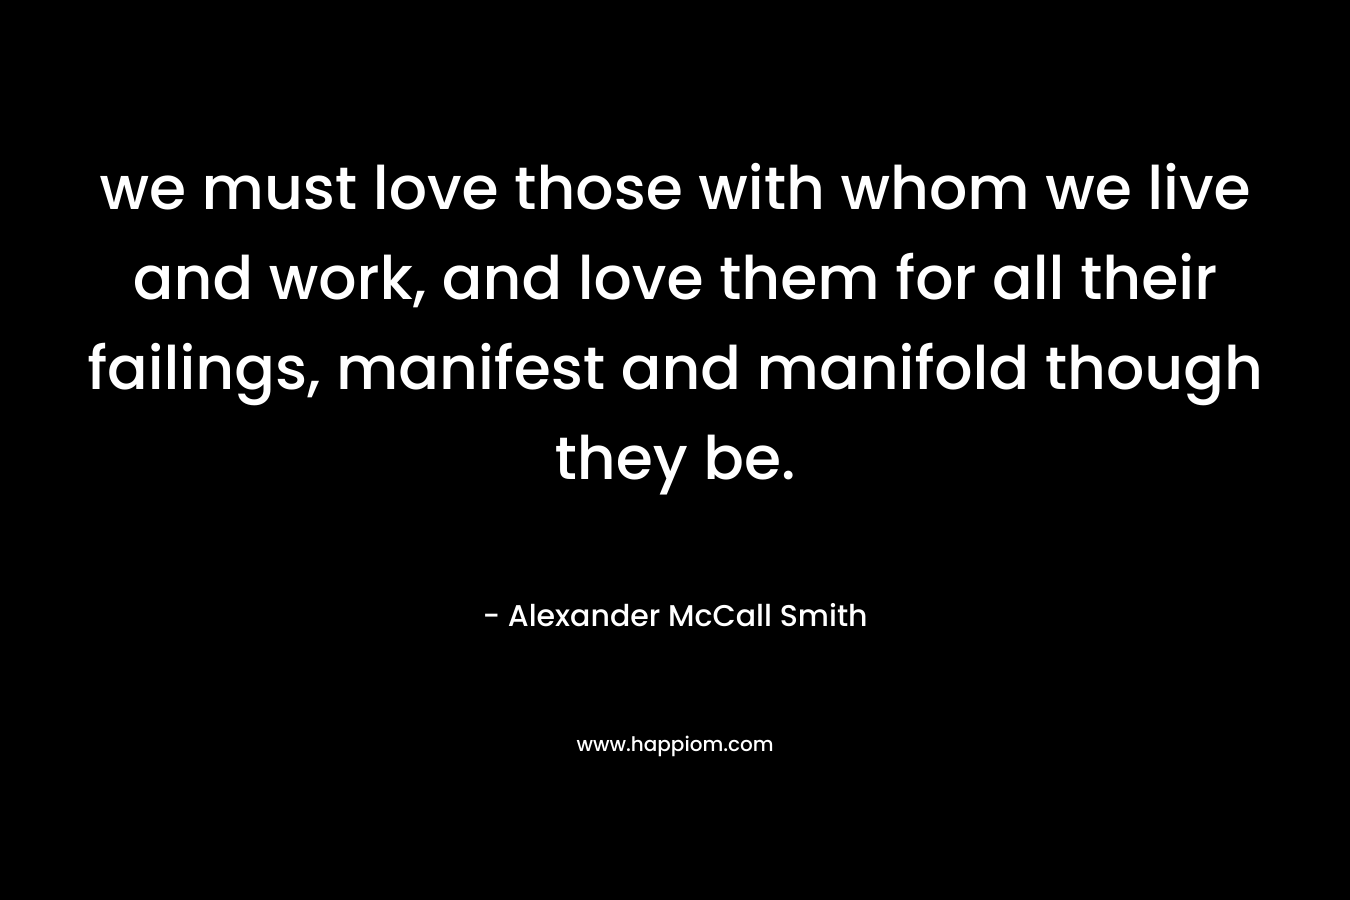 we must love those with whom we live and work, and love them for all their failings, manifest and manifold though they be.